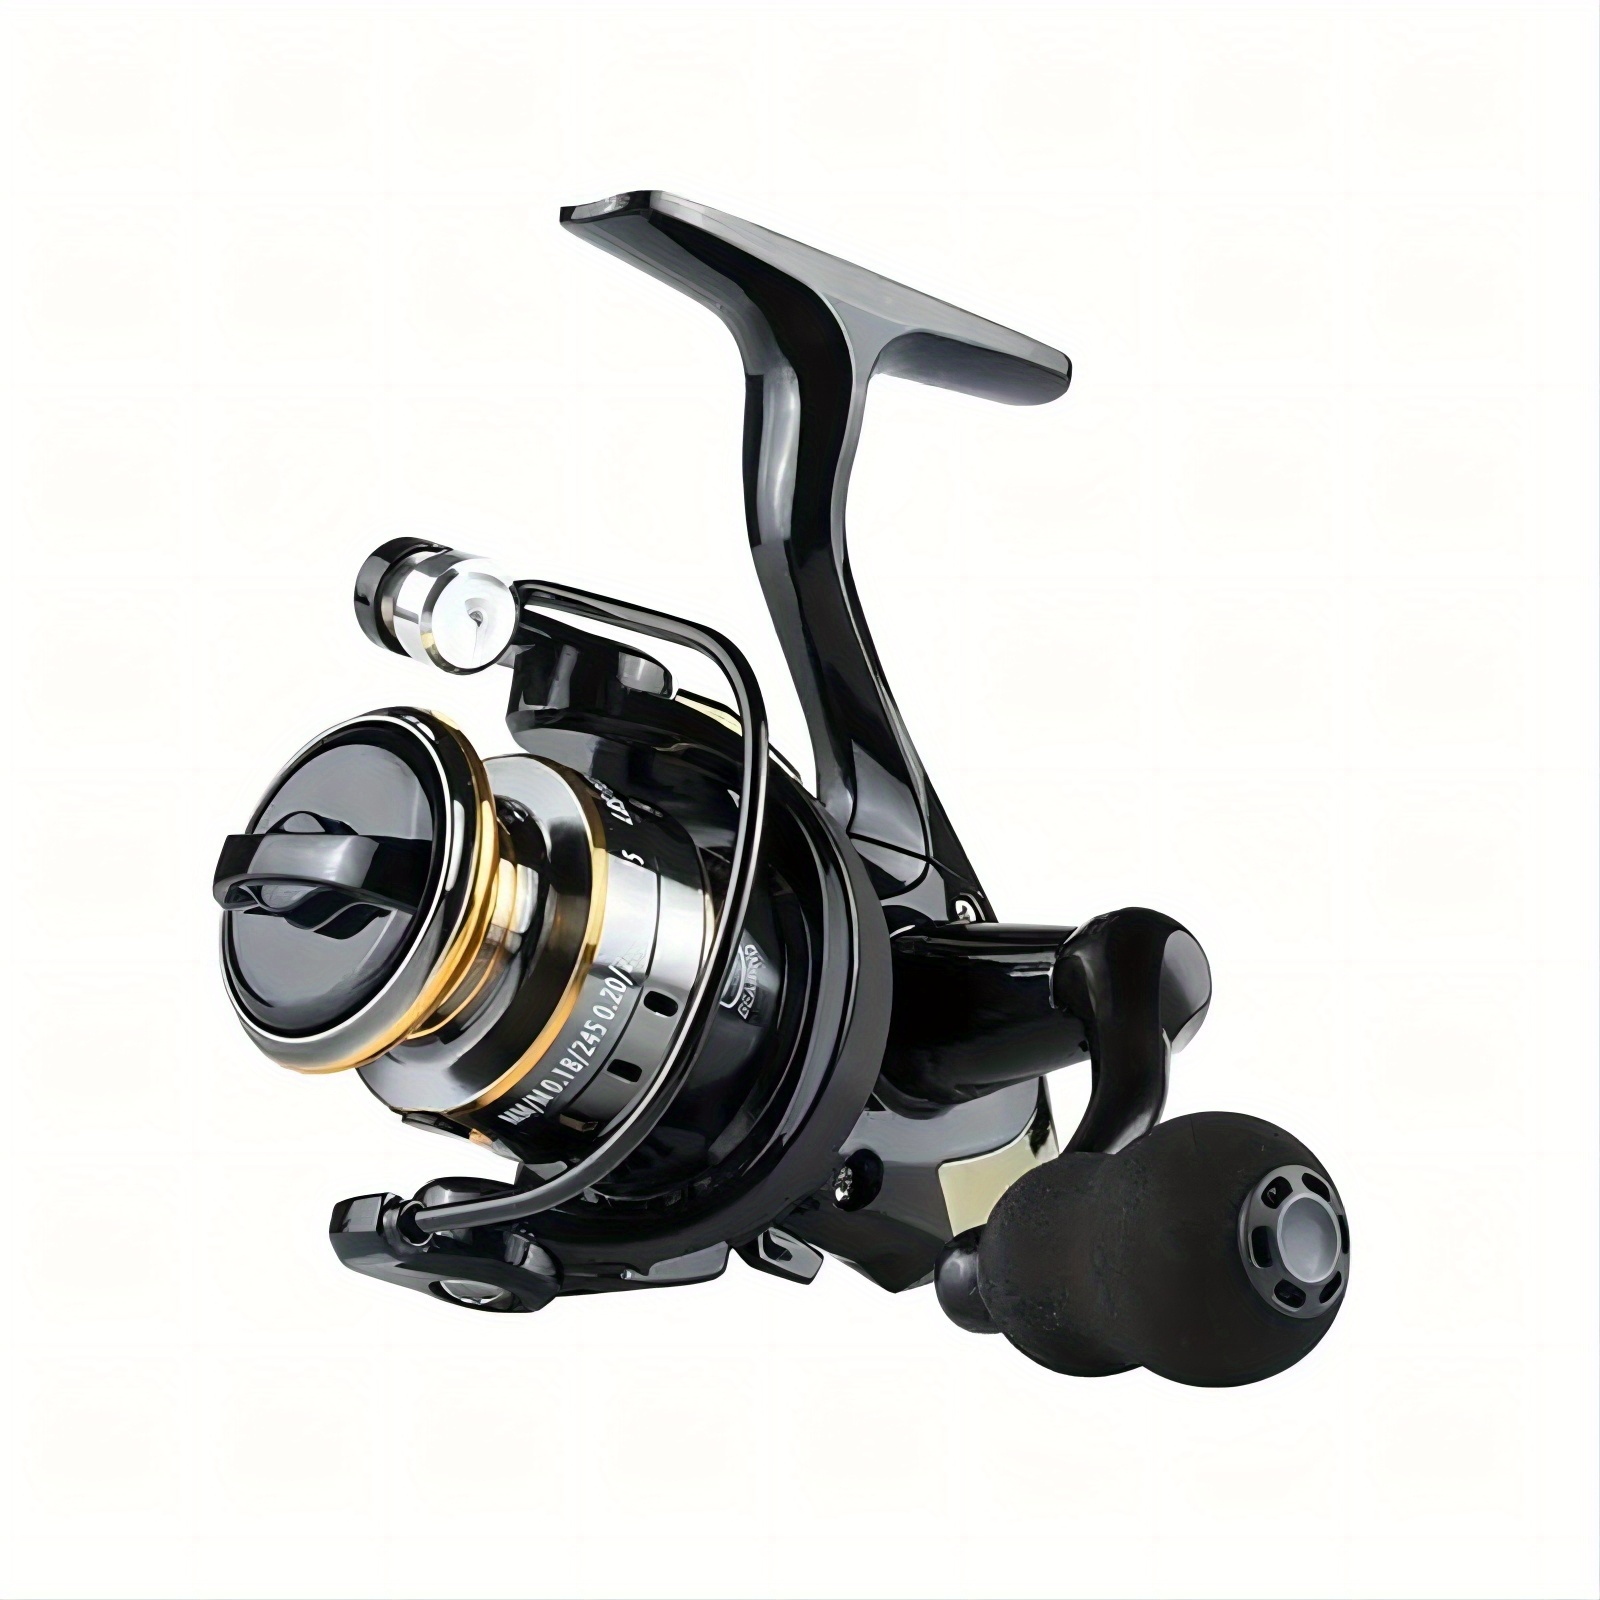  Fishing Reel,Open Face Fishing Reel,Ultra Smooth Powerful Spinning  Reel with 5.2:1 Gear Ratio,CNC Alloy Wire Cup,Reversible Handle for  Freshwater Saltwater (HB5000) : Sports & Outdoors